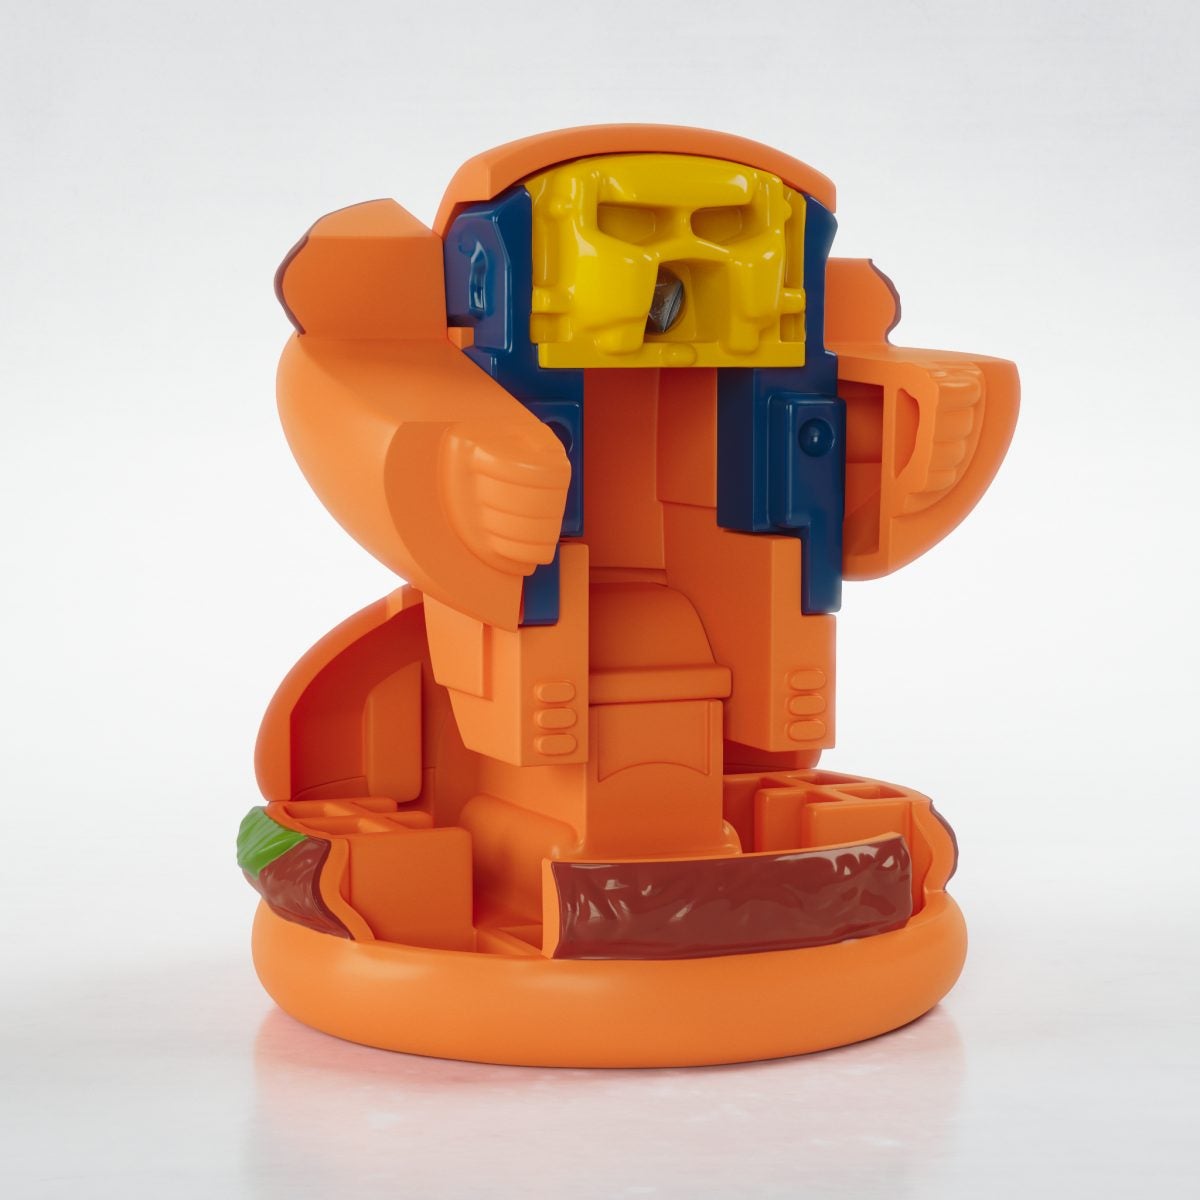 Iconic McDonald's Happy Meal Toys From Our Childhood Available From Nov 28 & We're Feeling Nostalgic - WORLD OF BUZZ 6